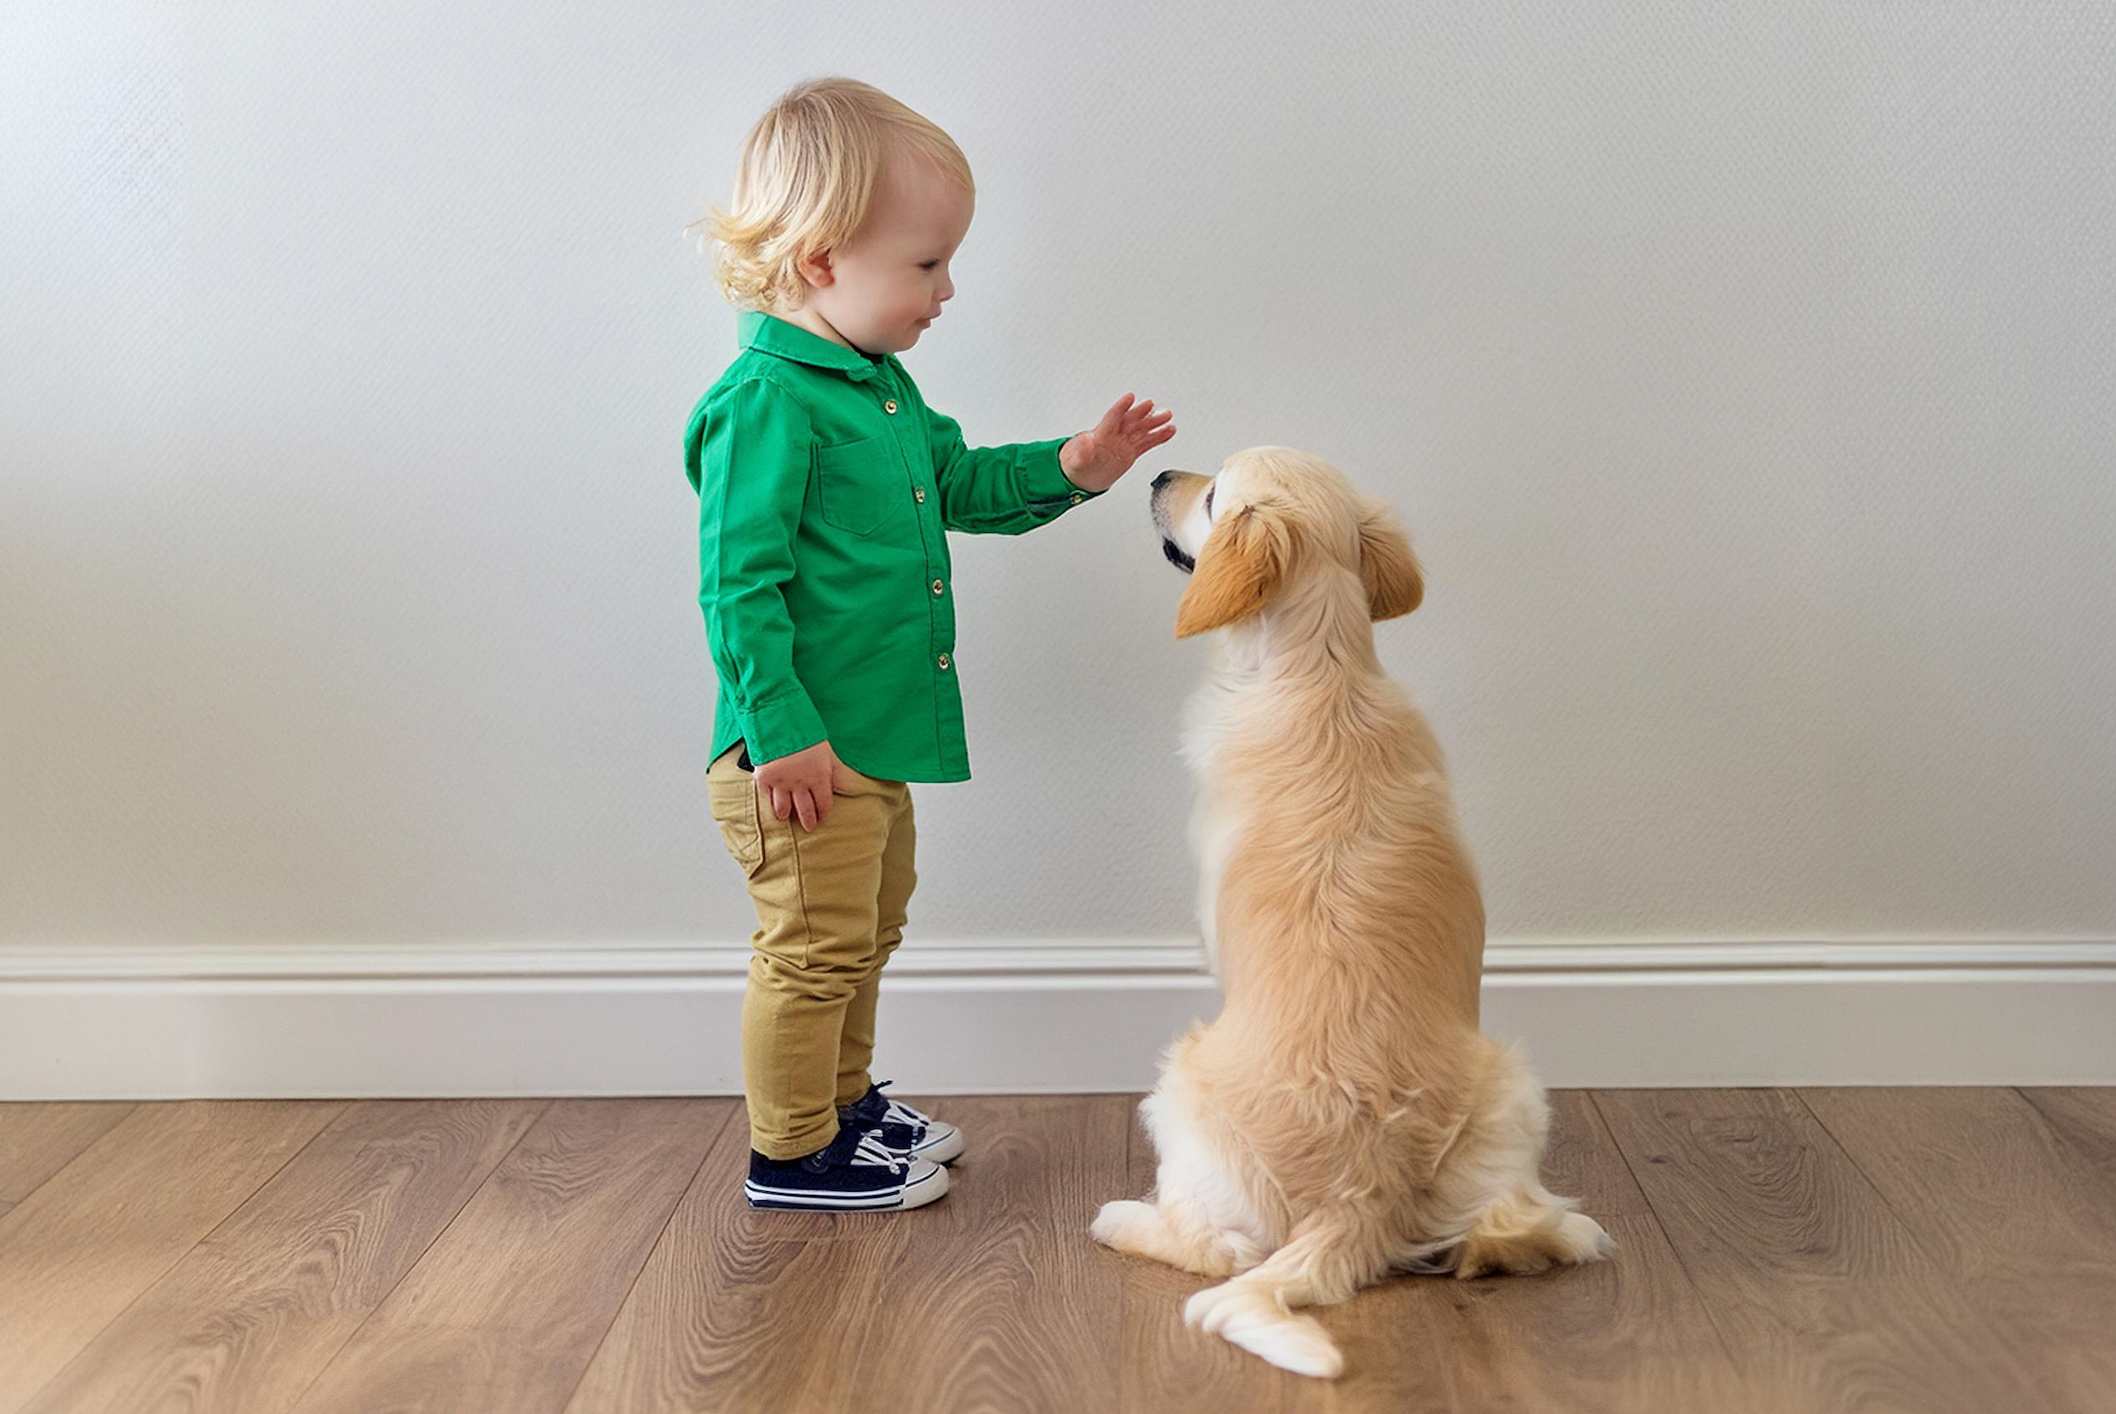 How to Introduce a New Puppy to Children